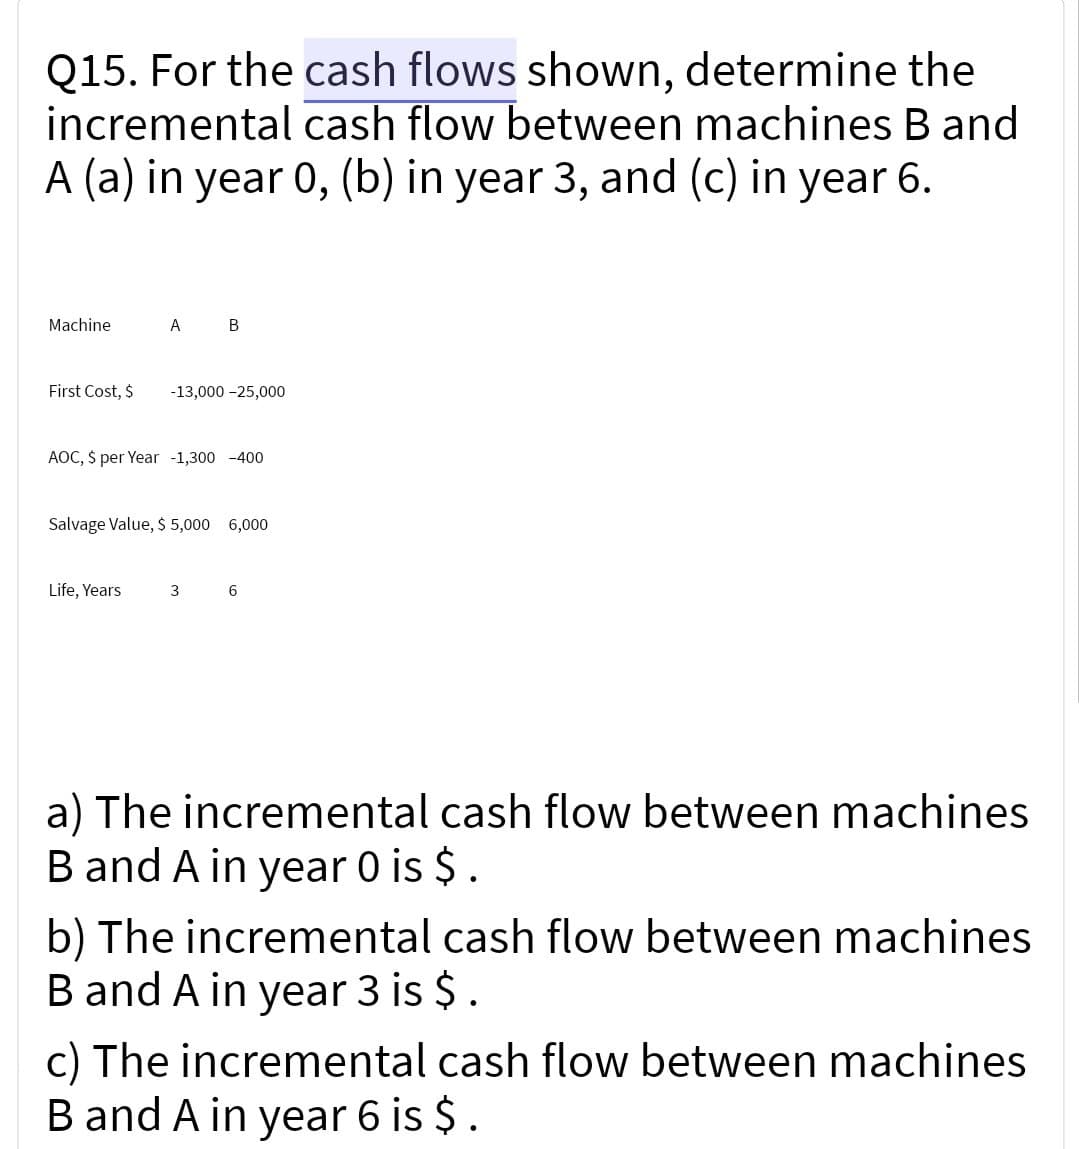 Q15. For the cash flows shown, determine the
incremental cash flow between machines B and
A (a) in year 0, (b) in year 3, and (c) in year 6.
Machine
First Cost, $
A B
-13,000 -25,000
AOC, $ per Year -1,300-400
Life, Years
Salvage Value, $ 5,000 6,000
3 6
a) The incremental cash flow between machines
B and A in year 0 is $ .
b) The incremental cash flow between machines
B and A in year 3 is $.
c) The incremental cash flow between machines
B and A in year 6 is $ .